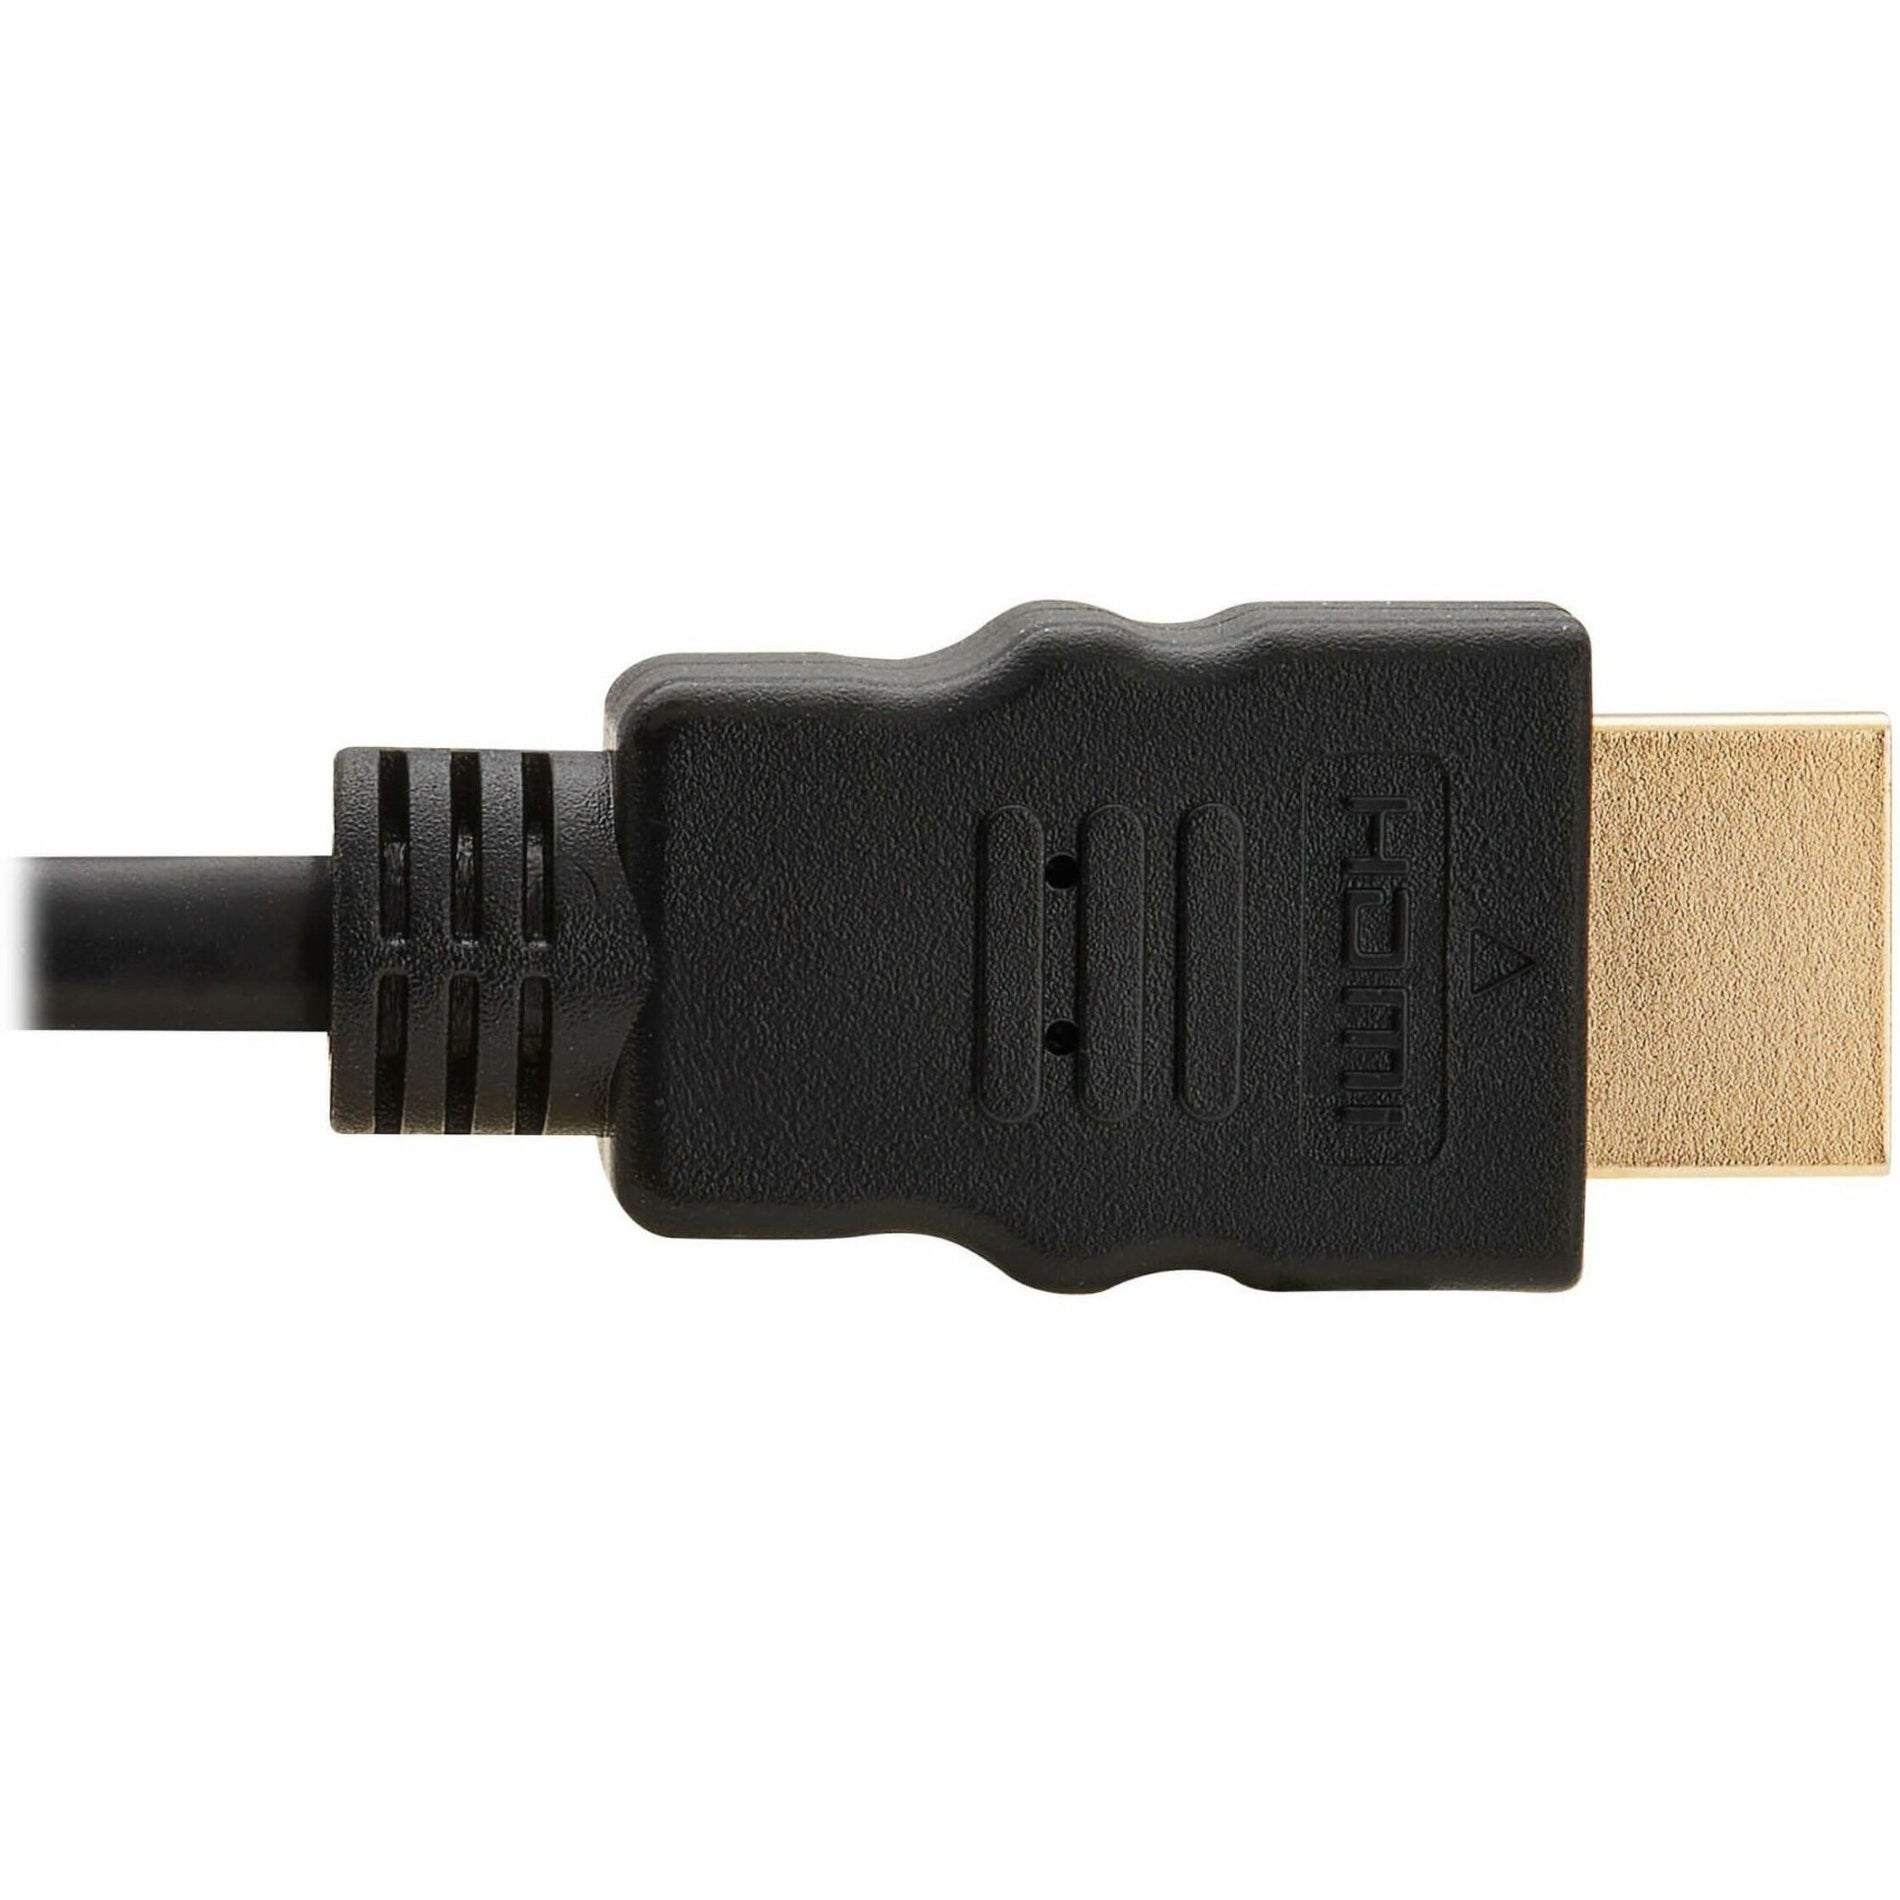 Tripp Lite P568-025 HDMI Gold Digital Video Cable, 25ft, High-Speed 18Gbps, Copper Conductor, Shielded, Black